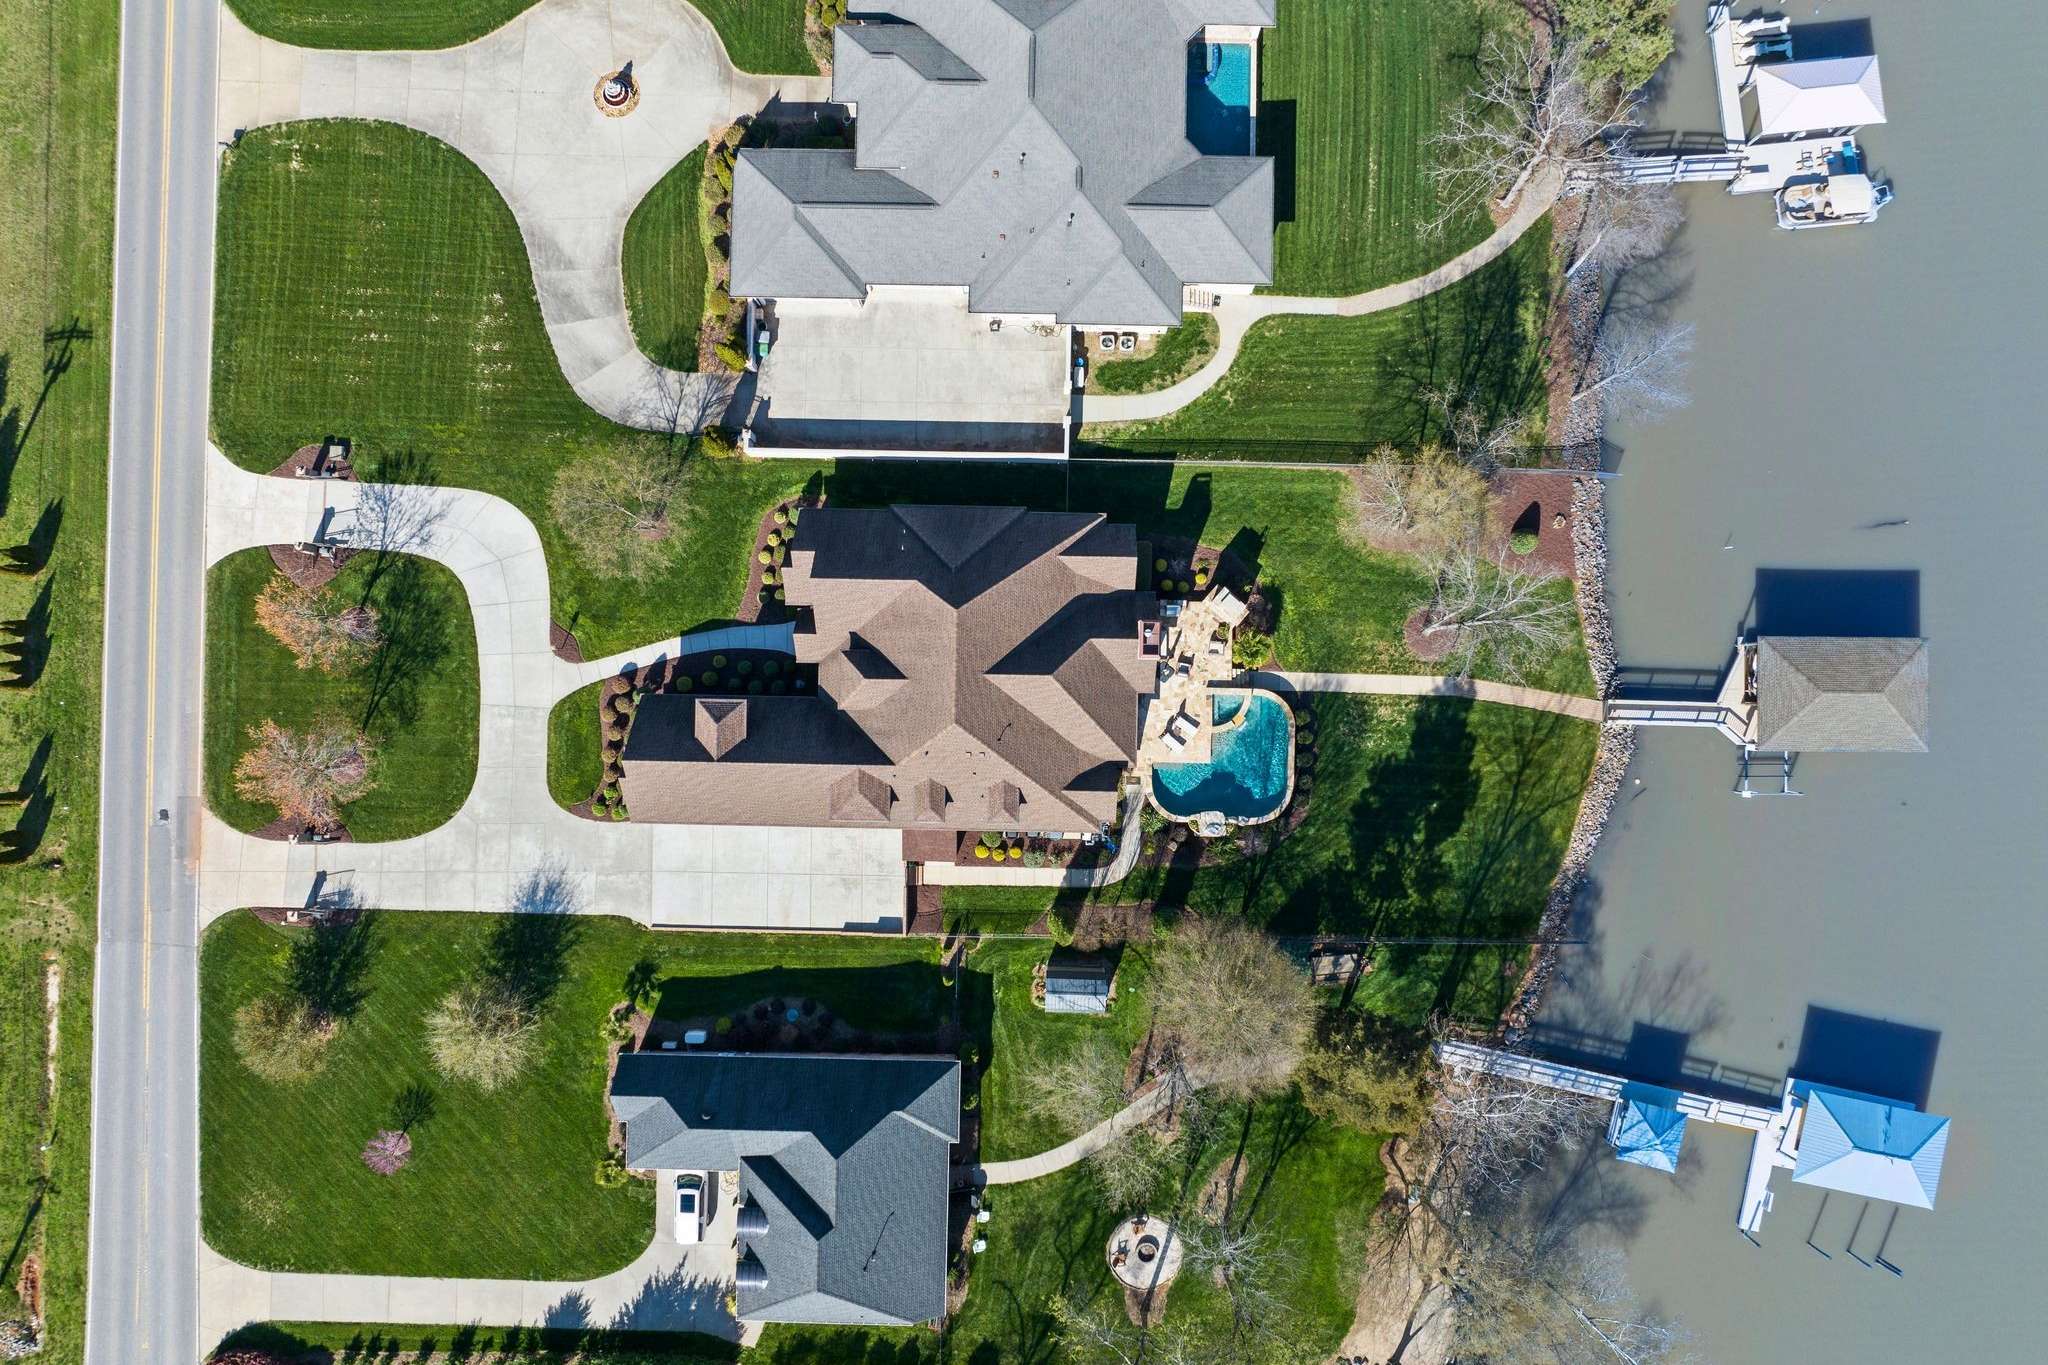 76 of 79. Exterior Daytime Drone Photo - Overhead view of 846 Armstrong Rd